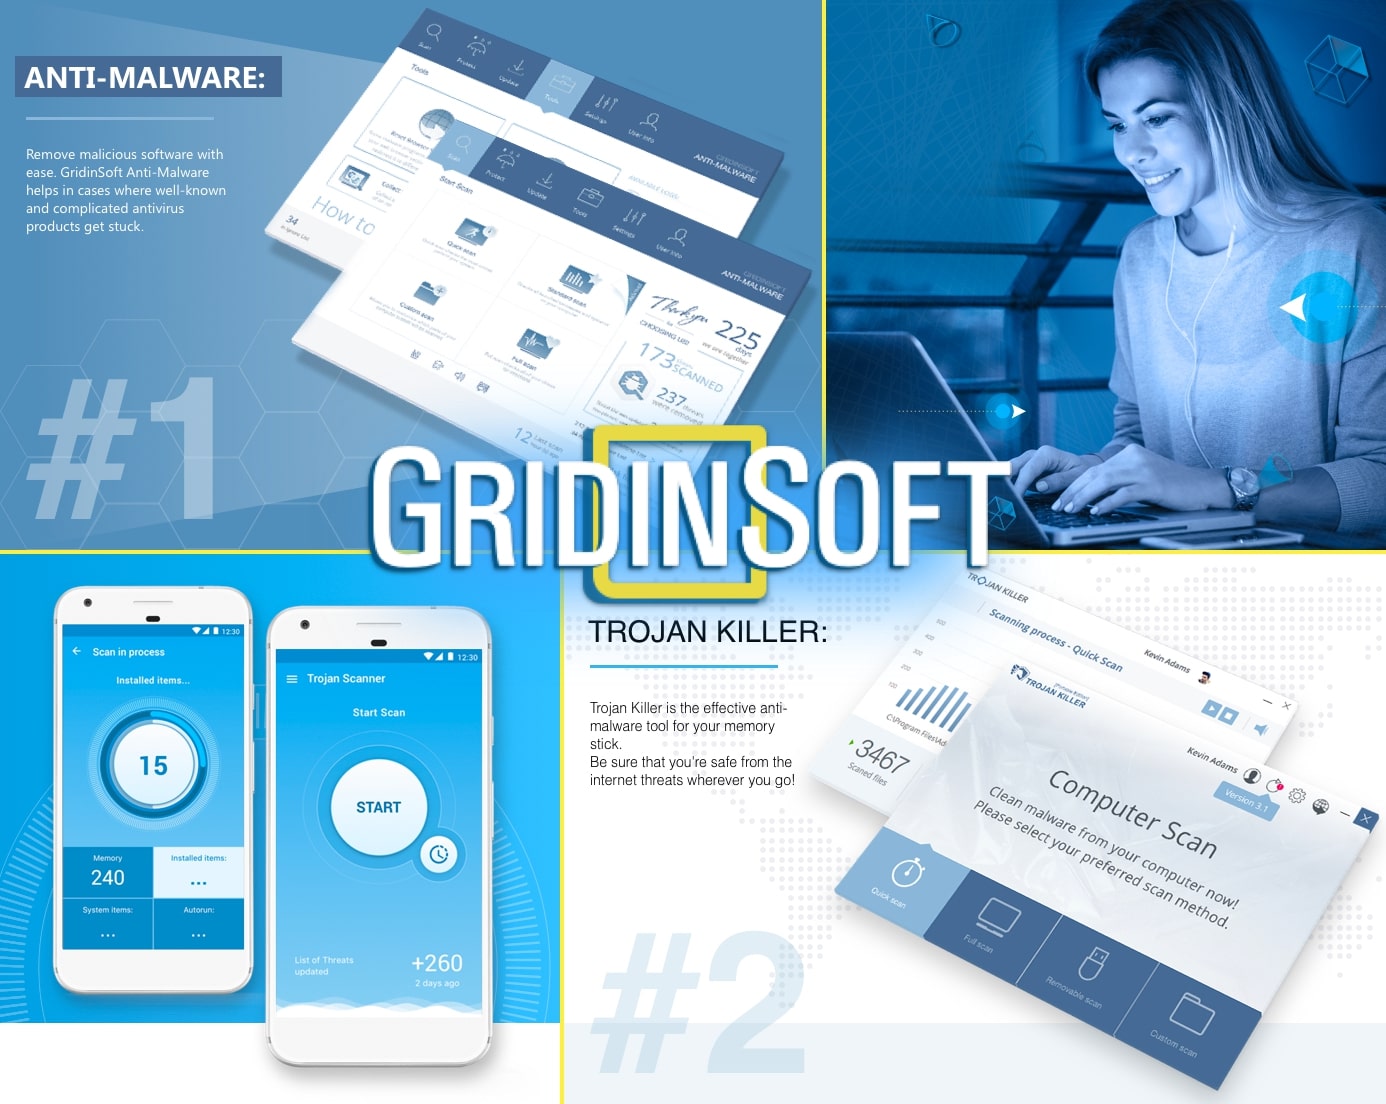 gridinsoft products